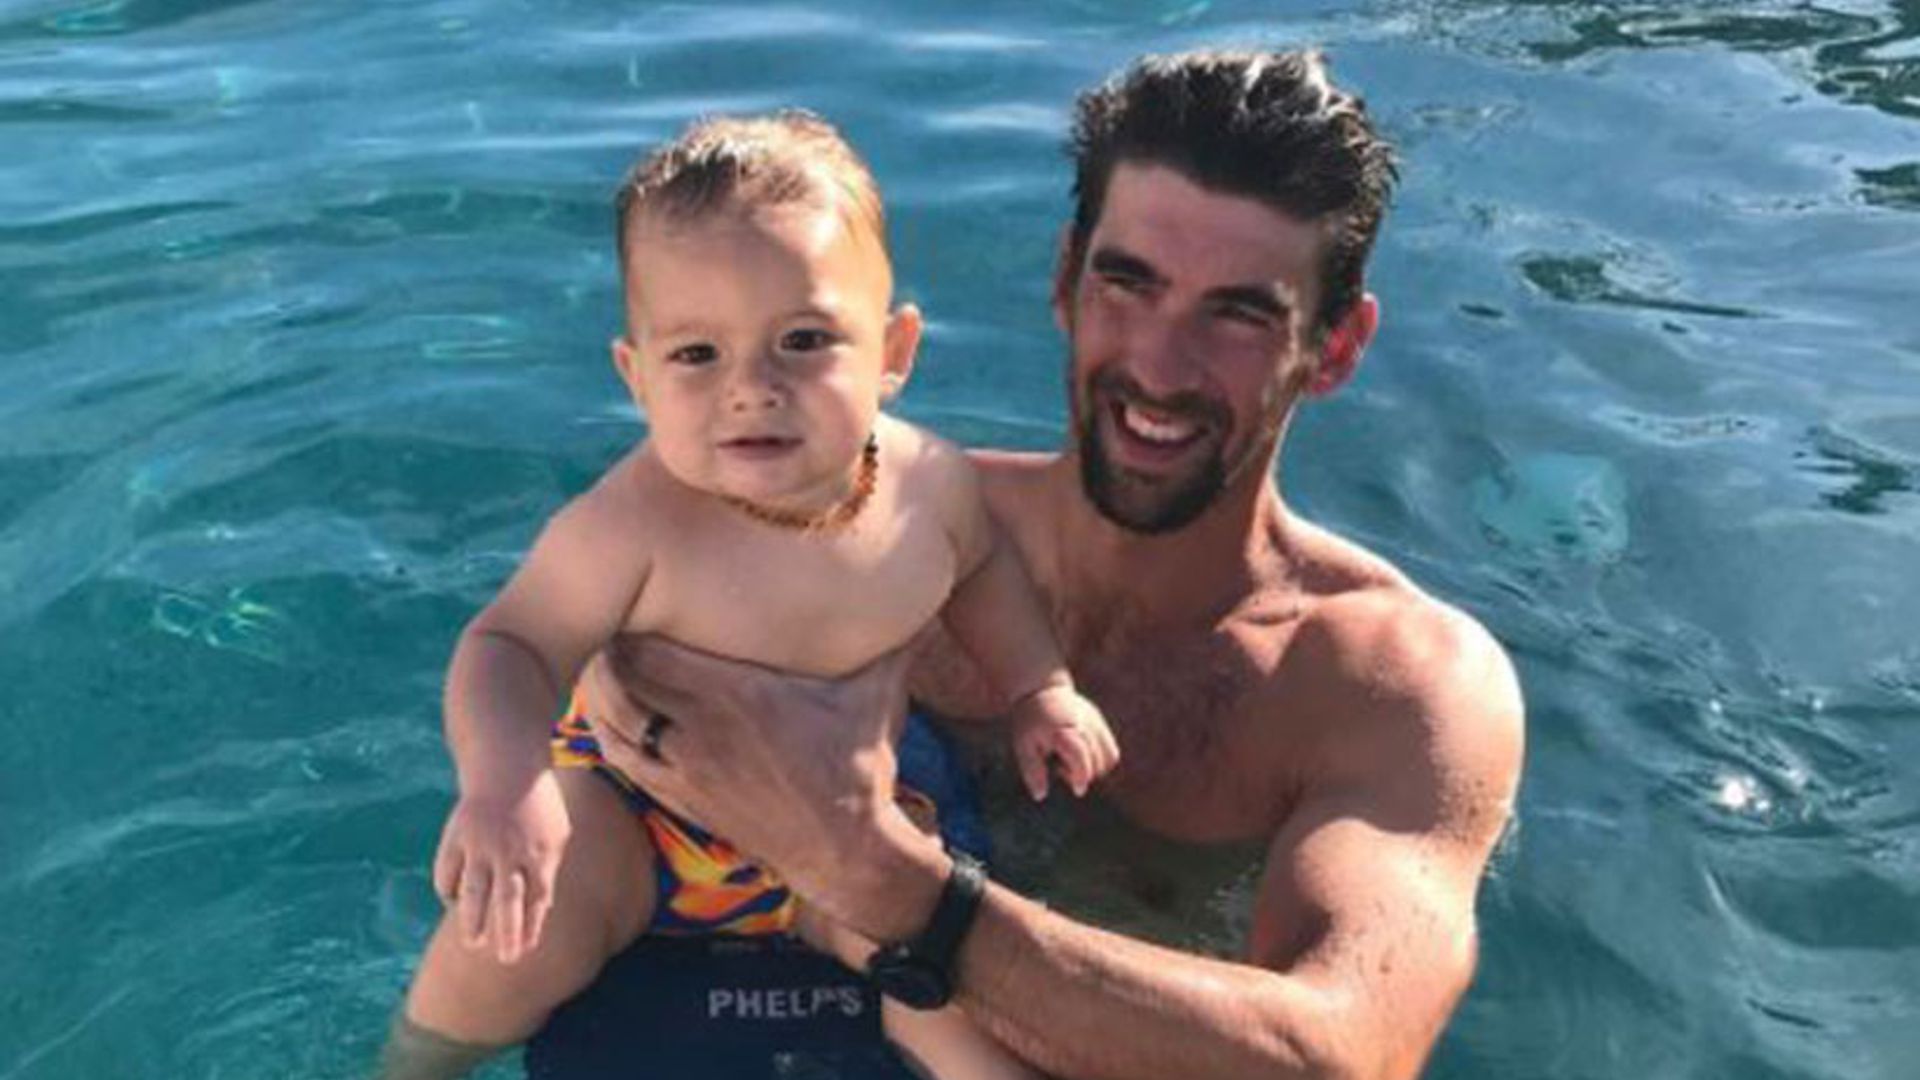 Michael Phelps shares heartfelt post as he celebrates son Boomer's first birthday